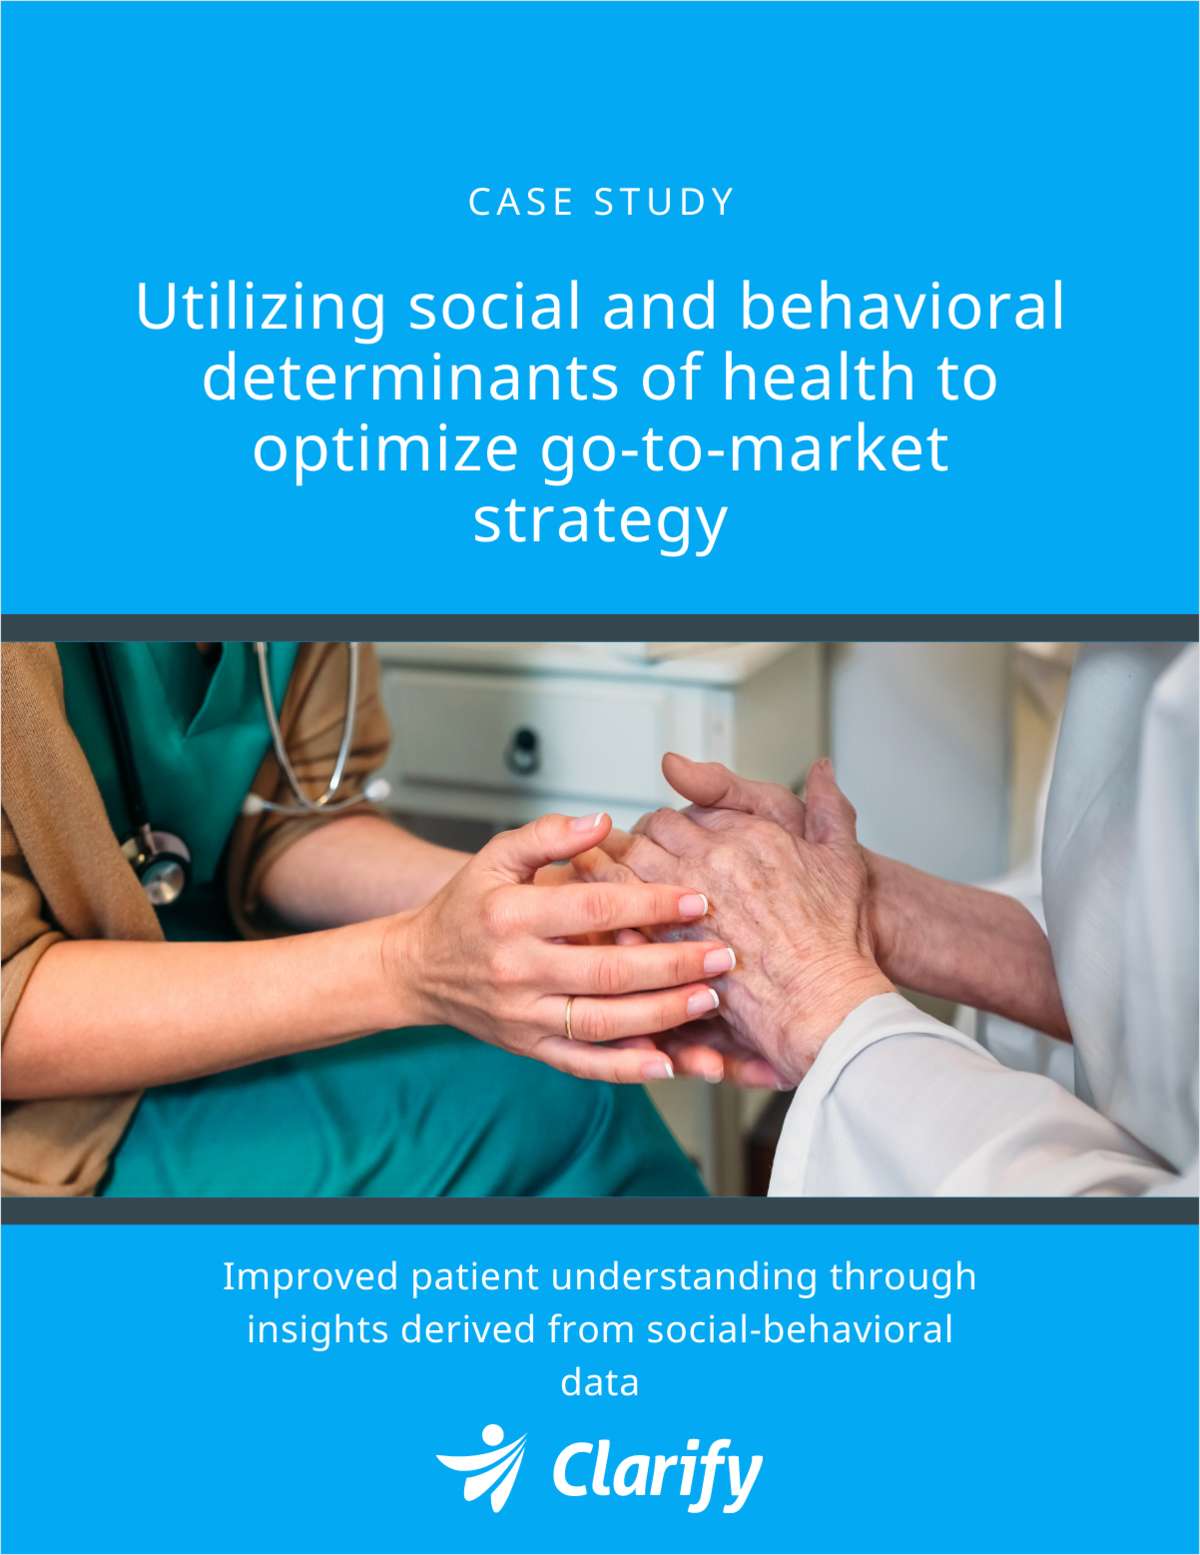 Utilizing social and behavioral determinants of health to optimize go-to-market strategy